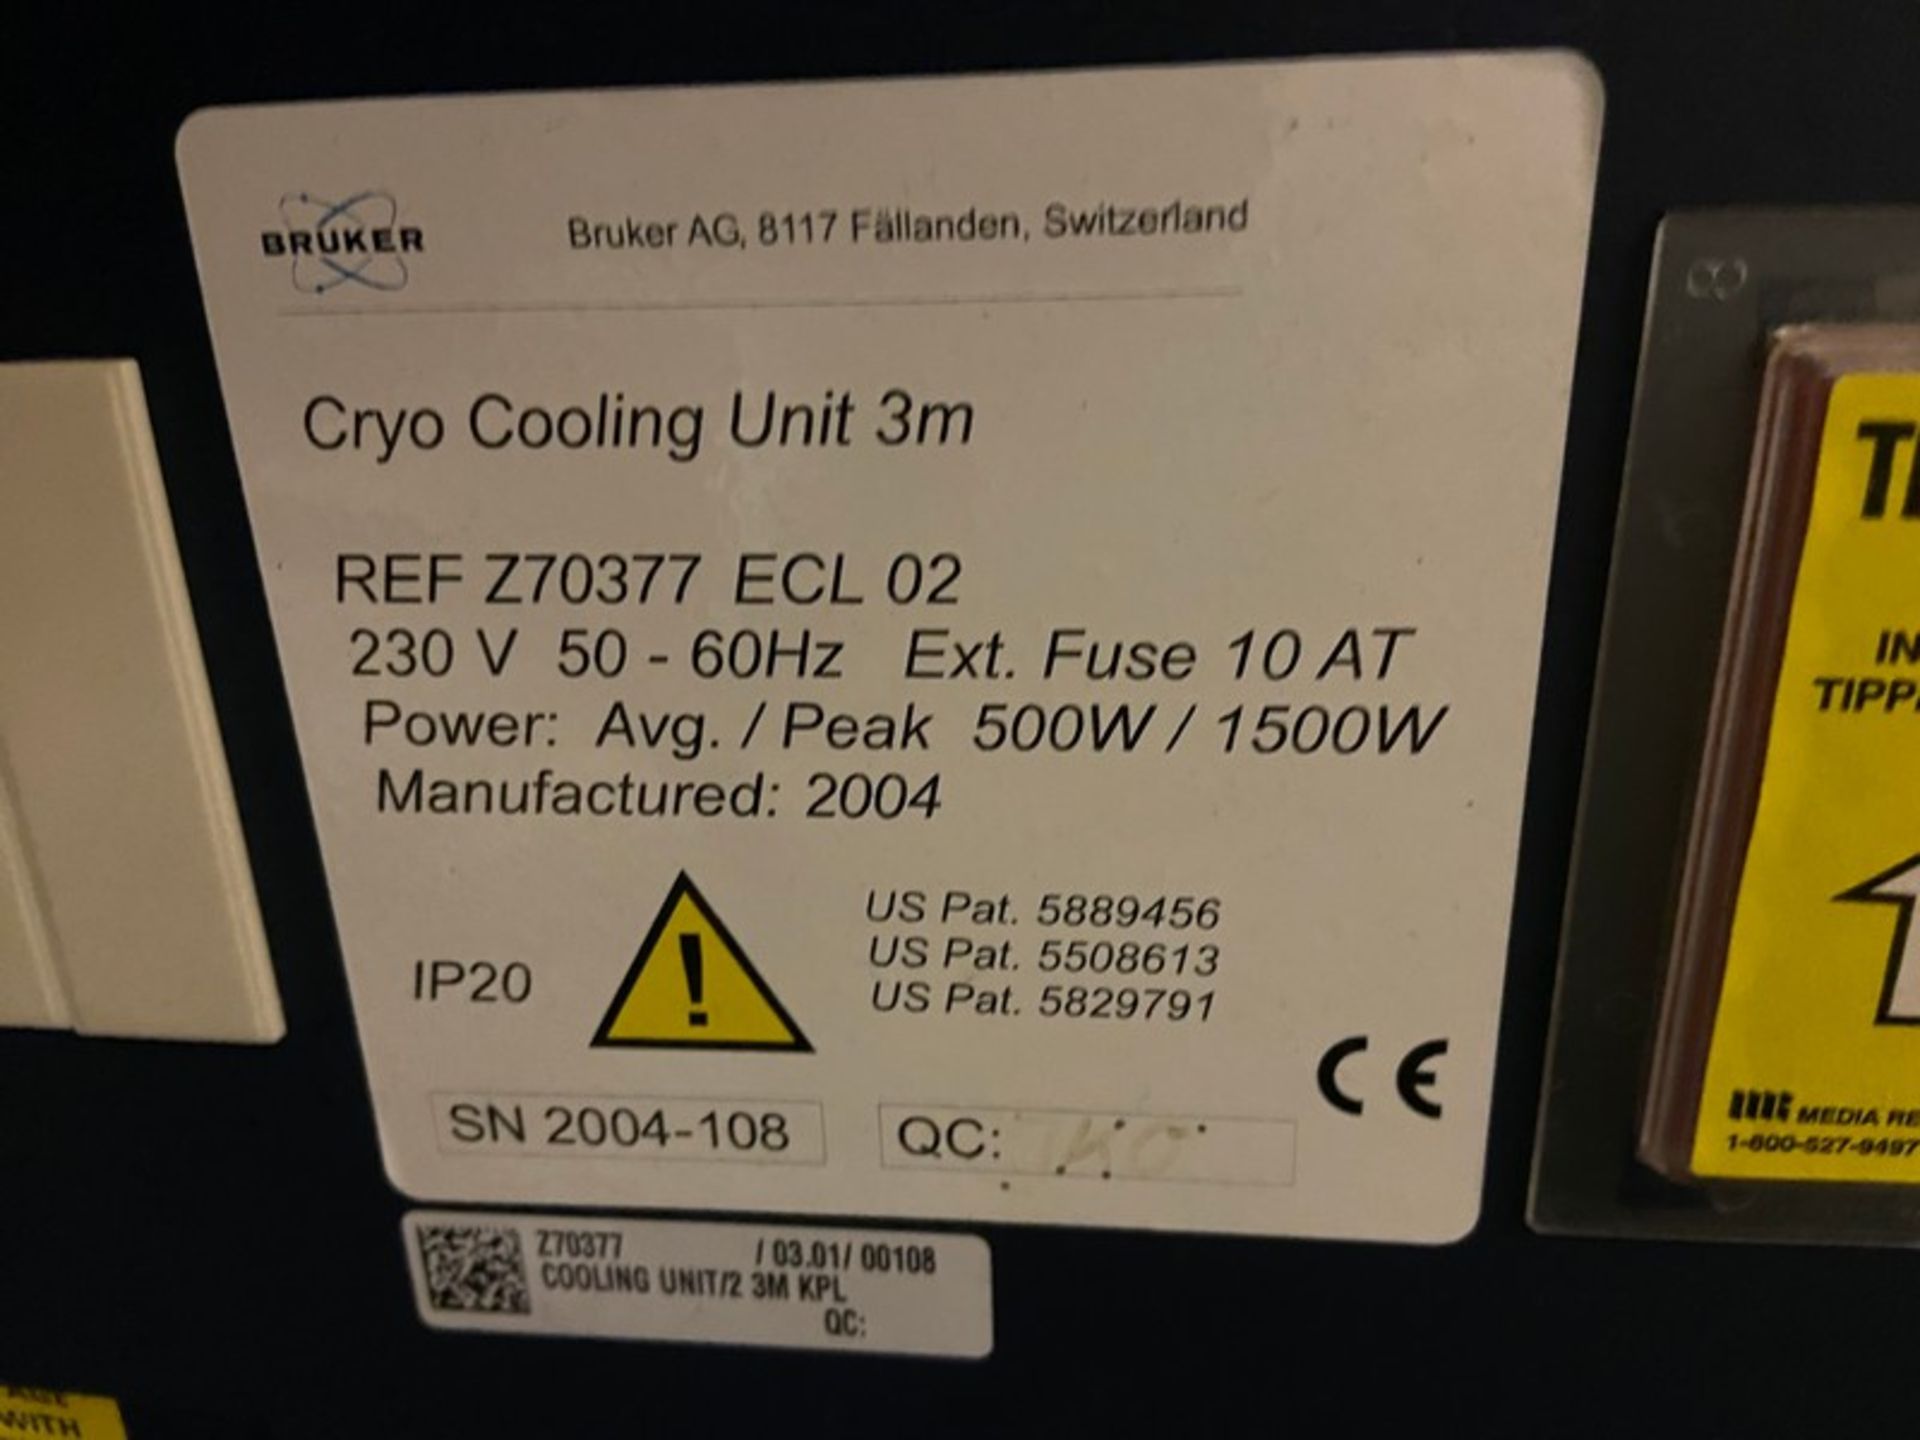 Bruker Cryo Platform Cryocooler Unit 3m, S/N 2004-108, REF Z70377 ECL 02, 230 Volts (LOCATED IN- - Image 5 of 6